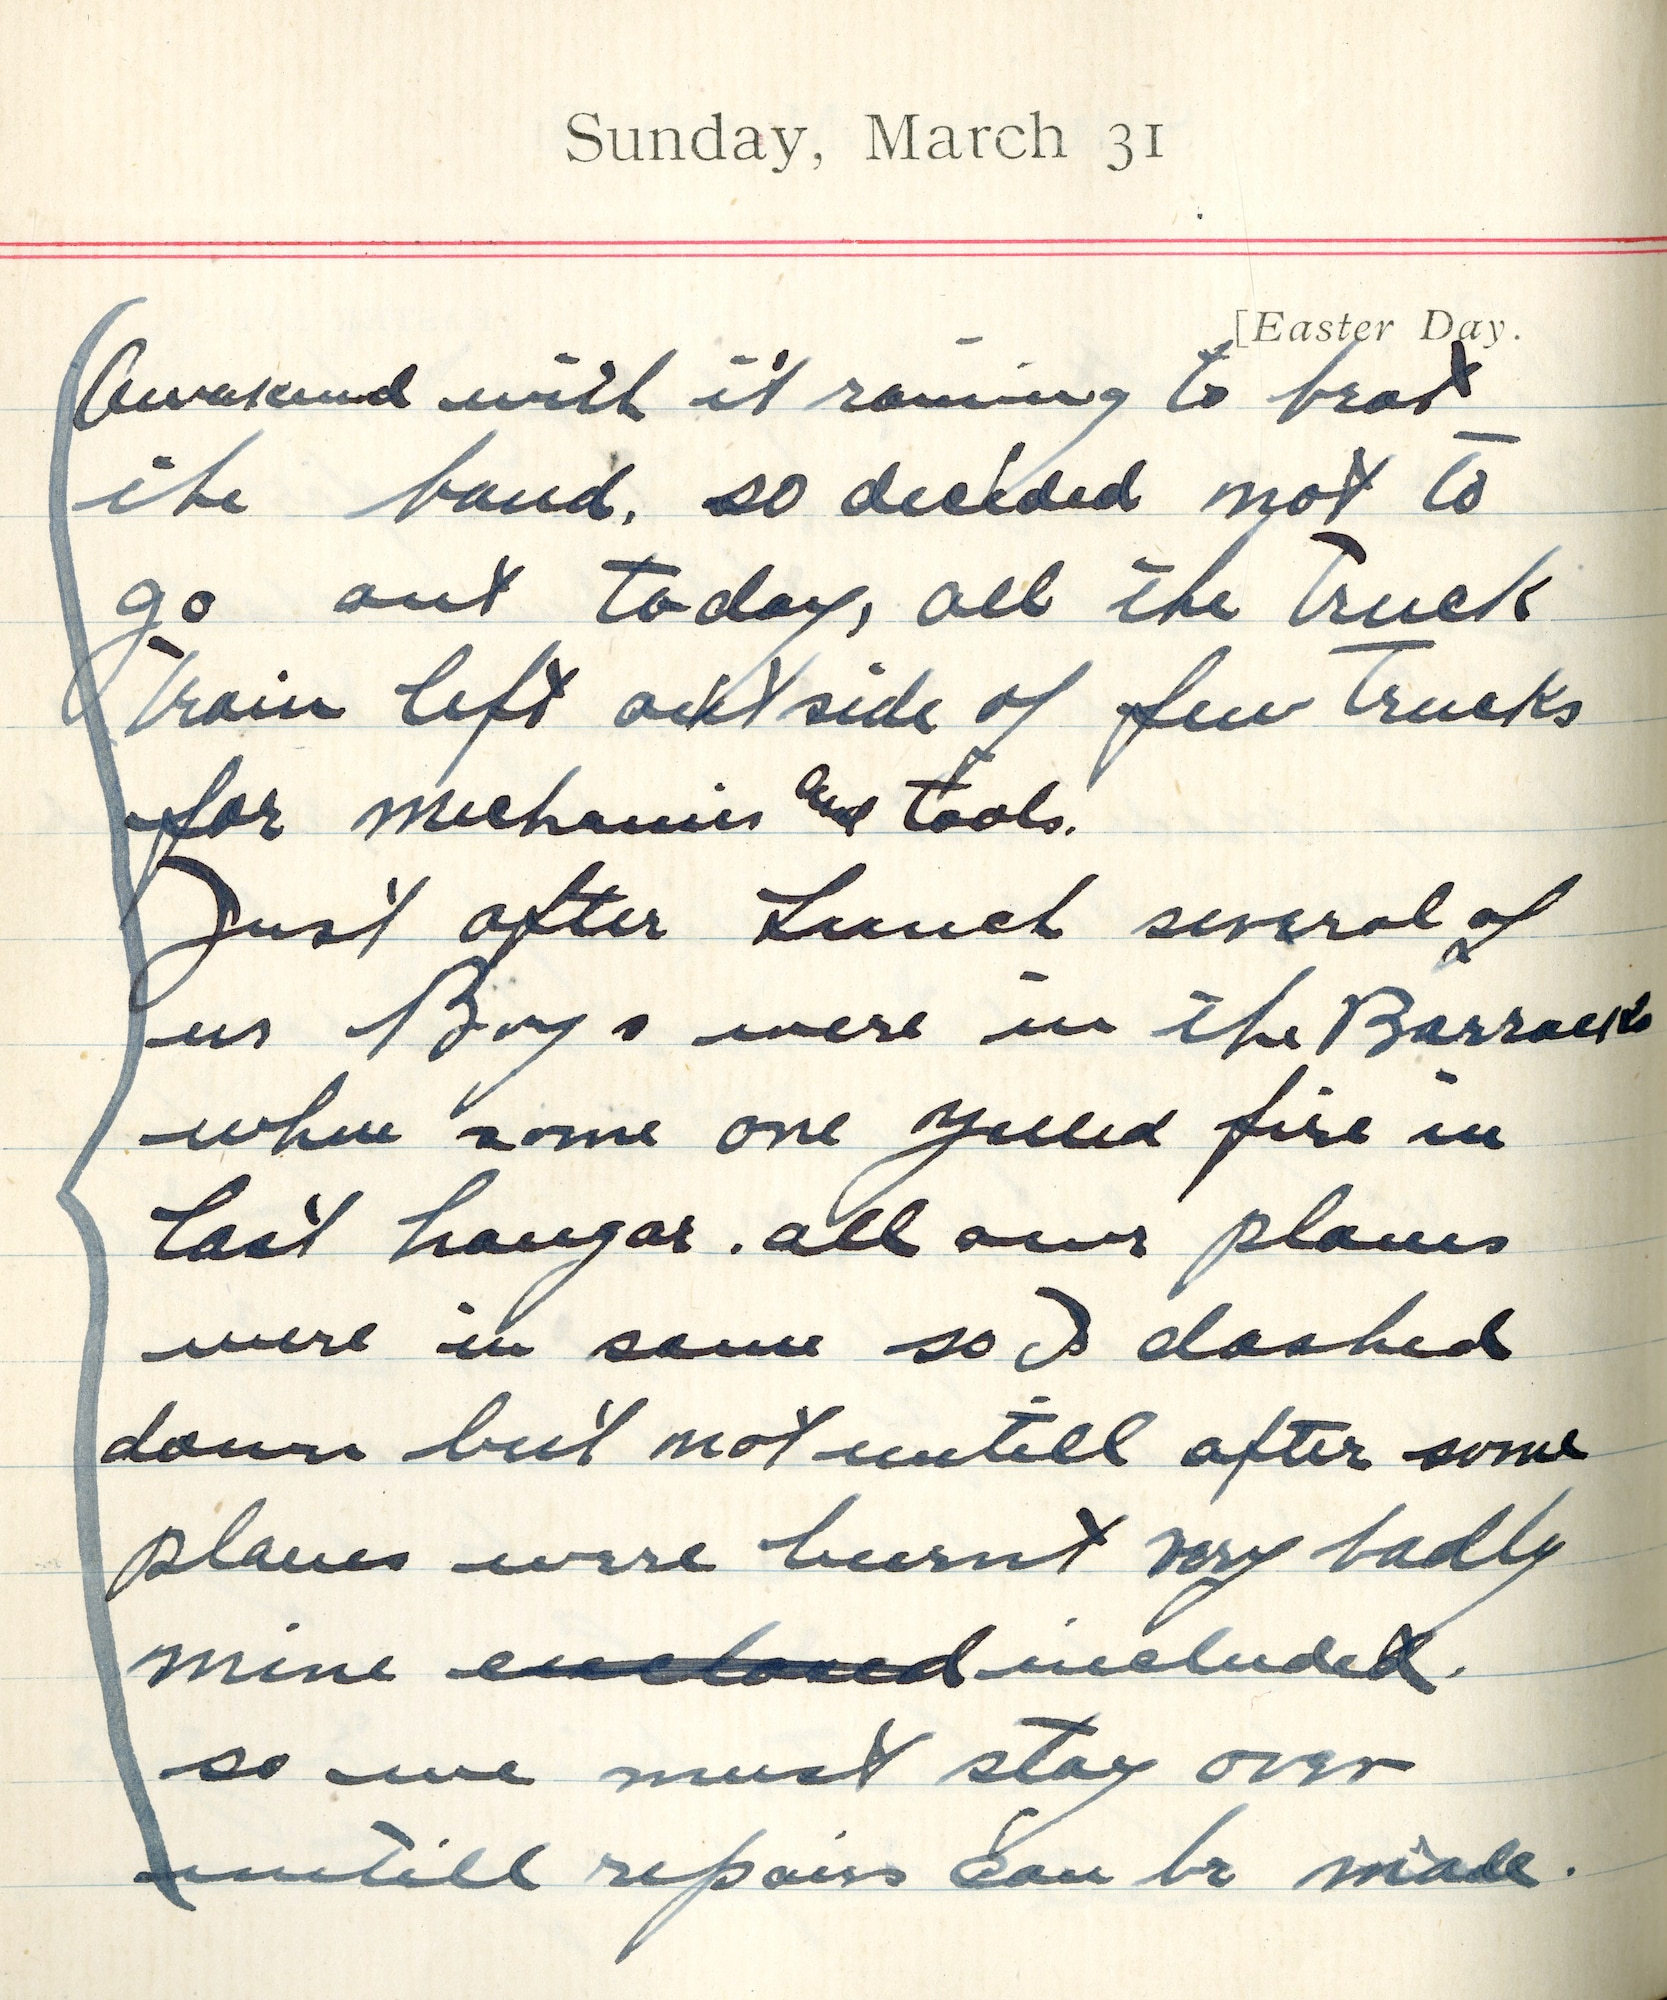 Capt. Edward V. Rickenbacker's 1918 wartime diary entry. (03/31/1918) Awakened with it raining to beat the band so decided not to go out today.  All the truck trains left outside of a few trucks for mechanics and tools.

Just after lunch several of us boys were in the barracks where someone yelled fire in last hangar.  All our planes were in same, so I dashed down but not until after some planes were burnt very badly.  Mine included.  So we must stay over until repairs can be made.